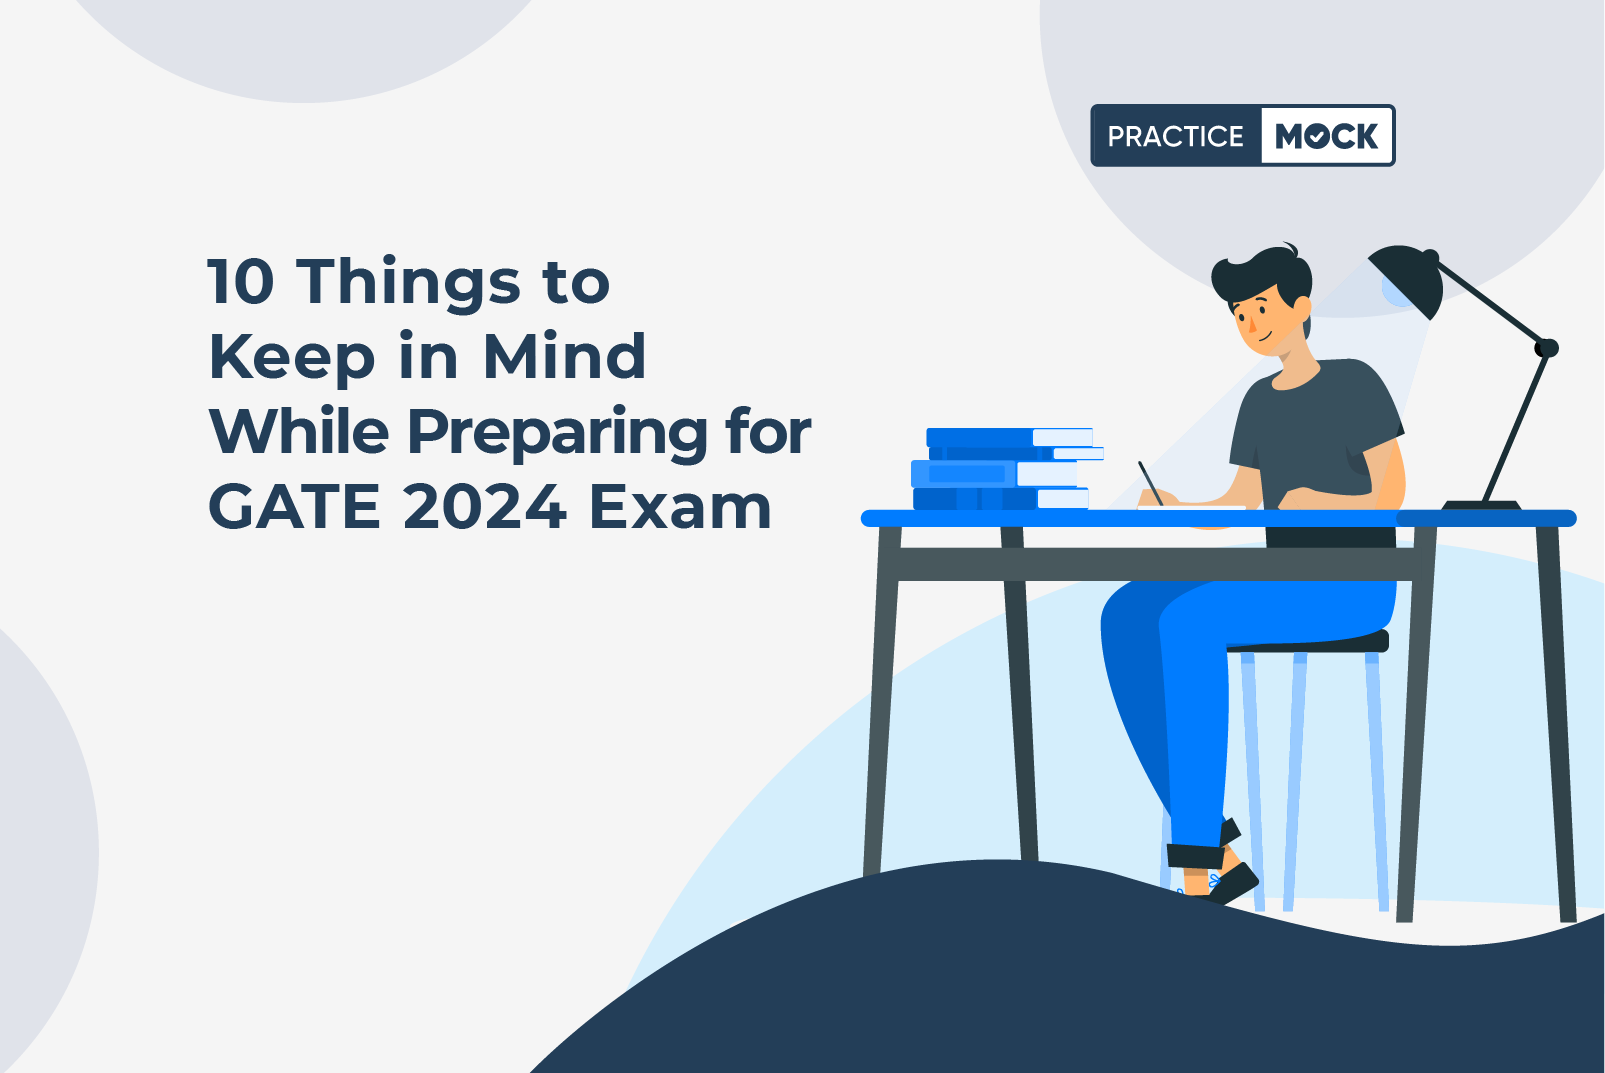 10 Things to Keep in Mind While Preparing for GATE 2024 Exam